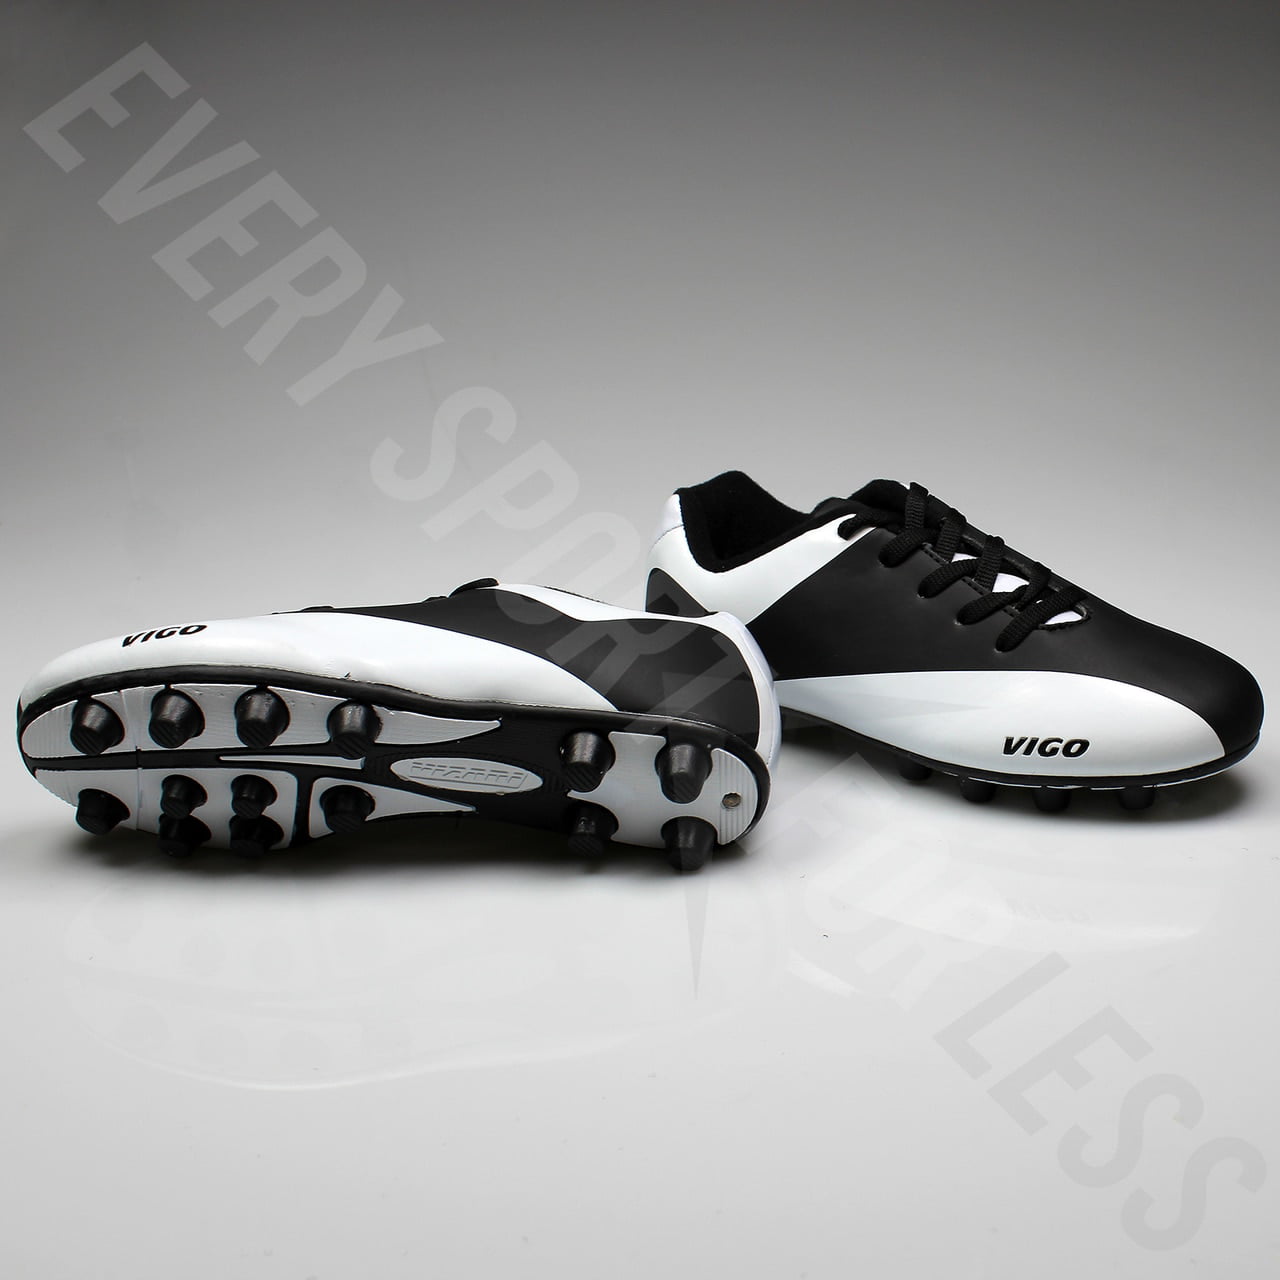 Details about   Vizari Vigo FG Youth and Junior Soccer Cleats NEW Lists @ $22 Black/White 